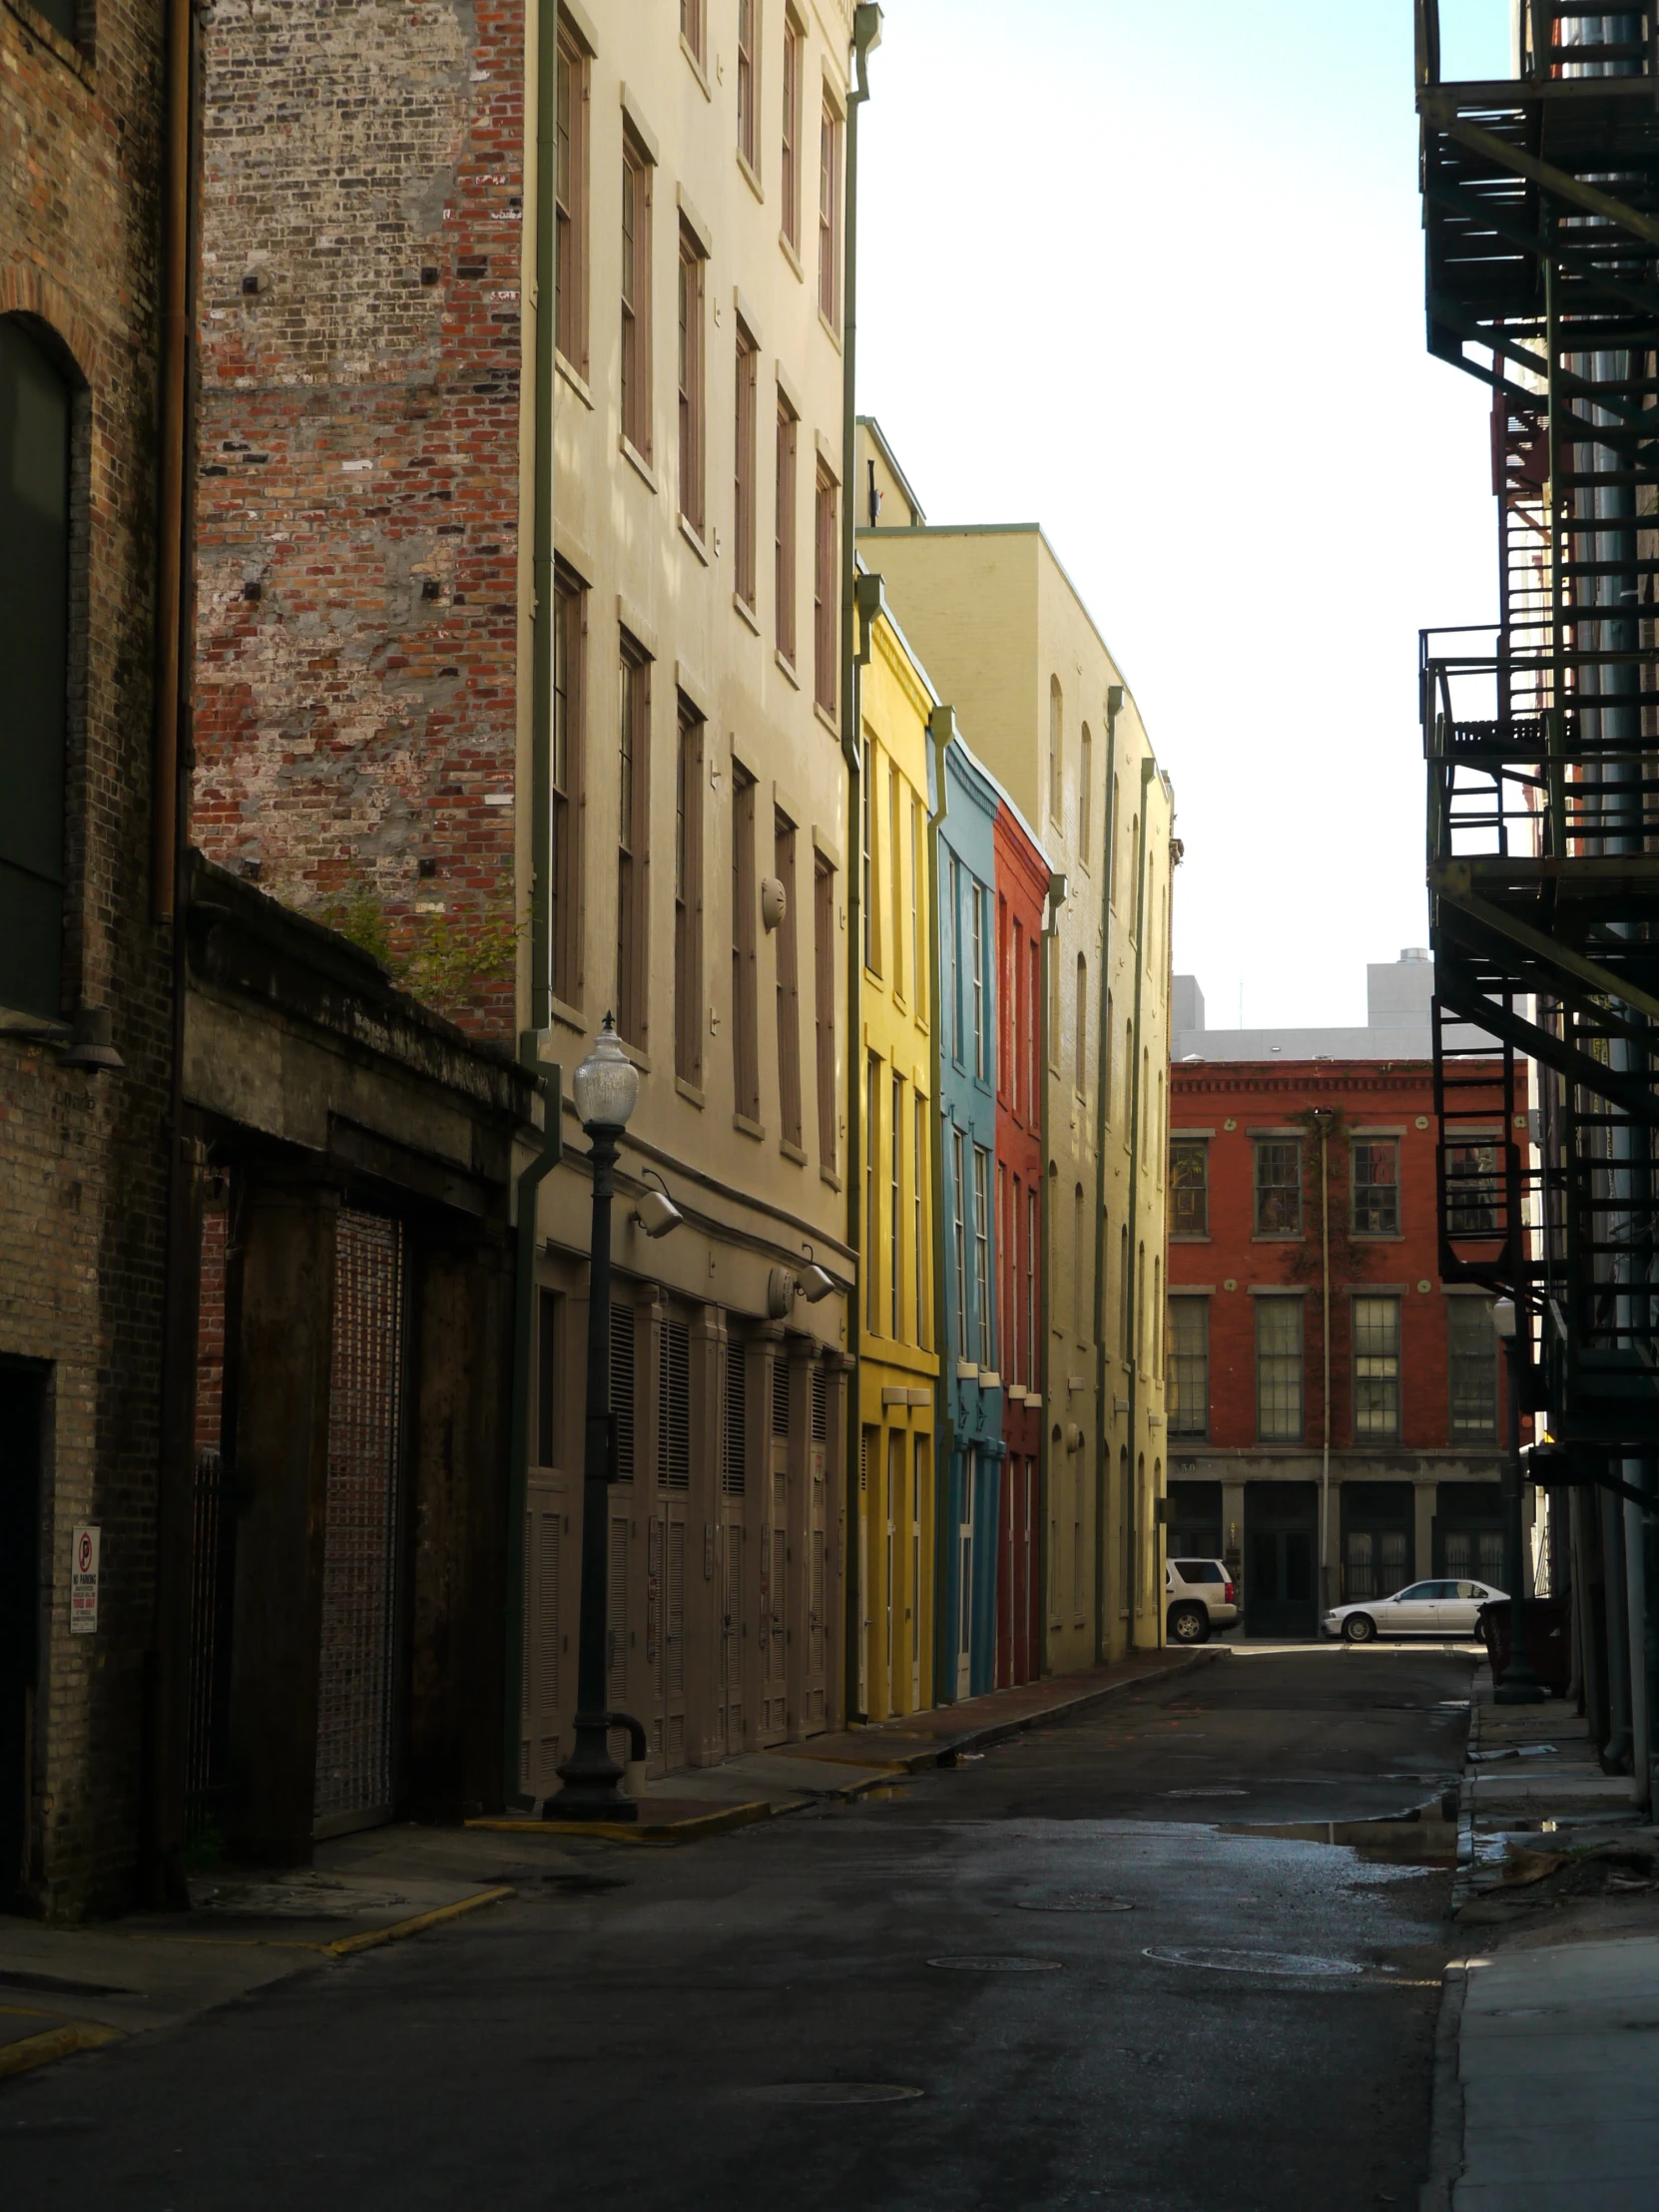 the brick buildings are lined with multi - colored shutters